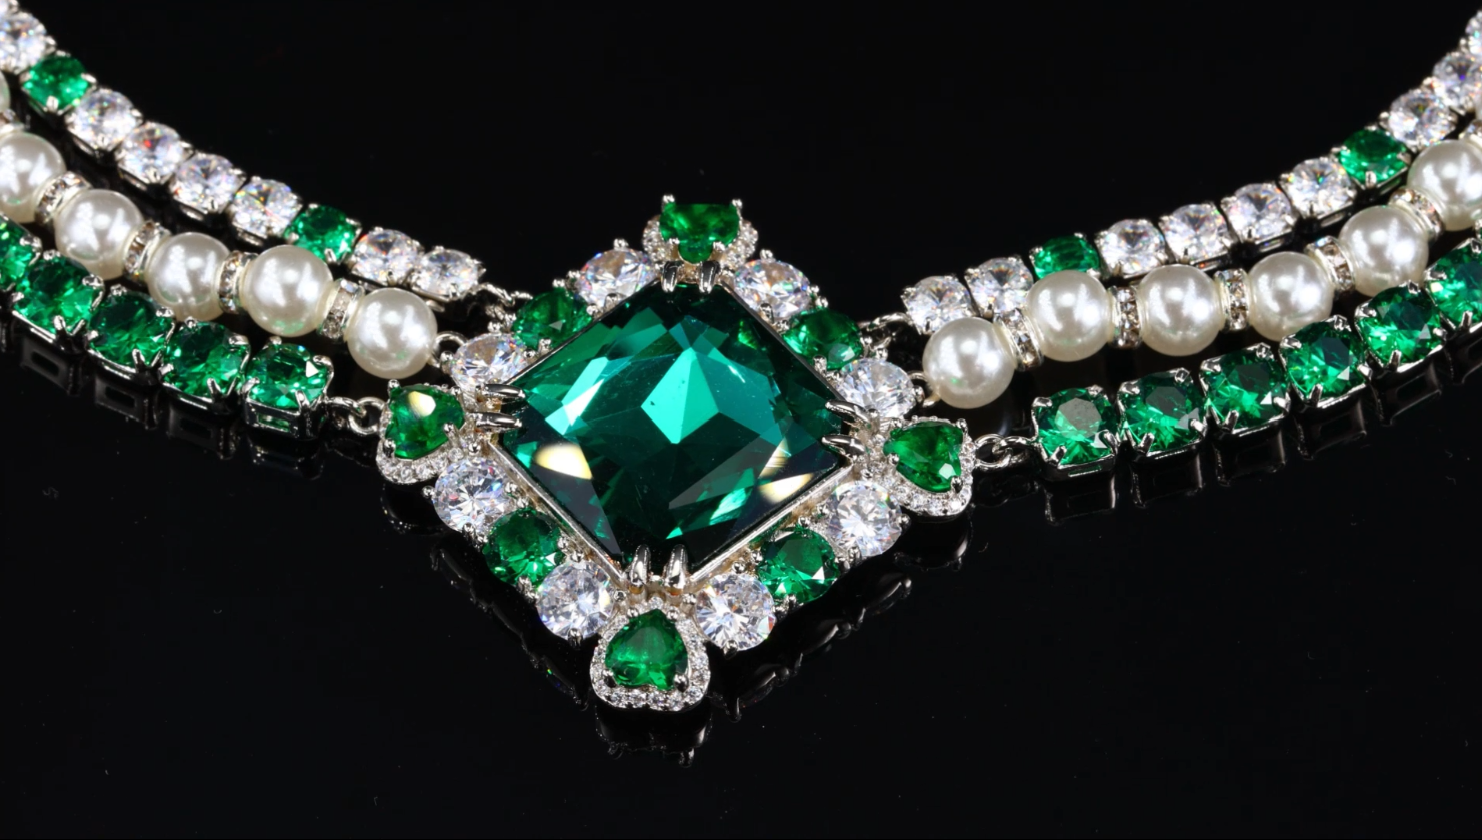 Crystal-embellished diamond shape necklace with green emerald accents.